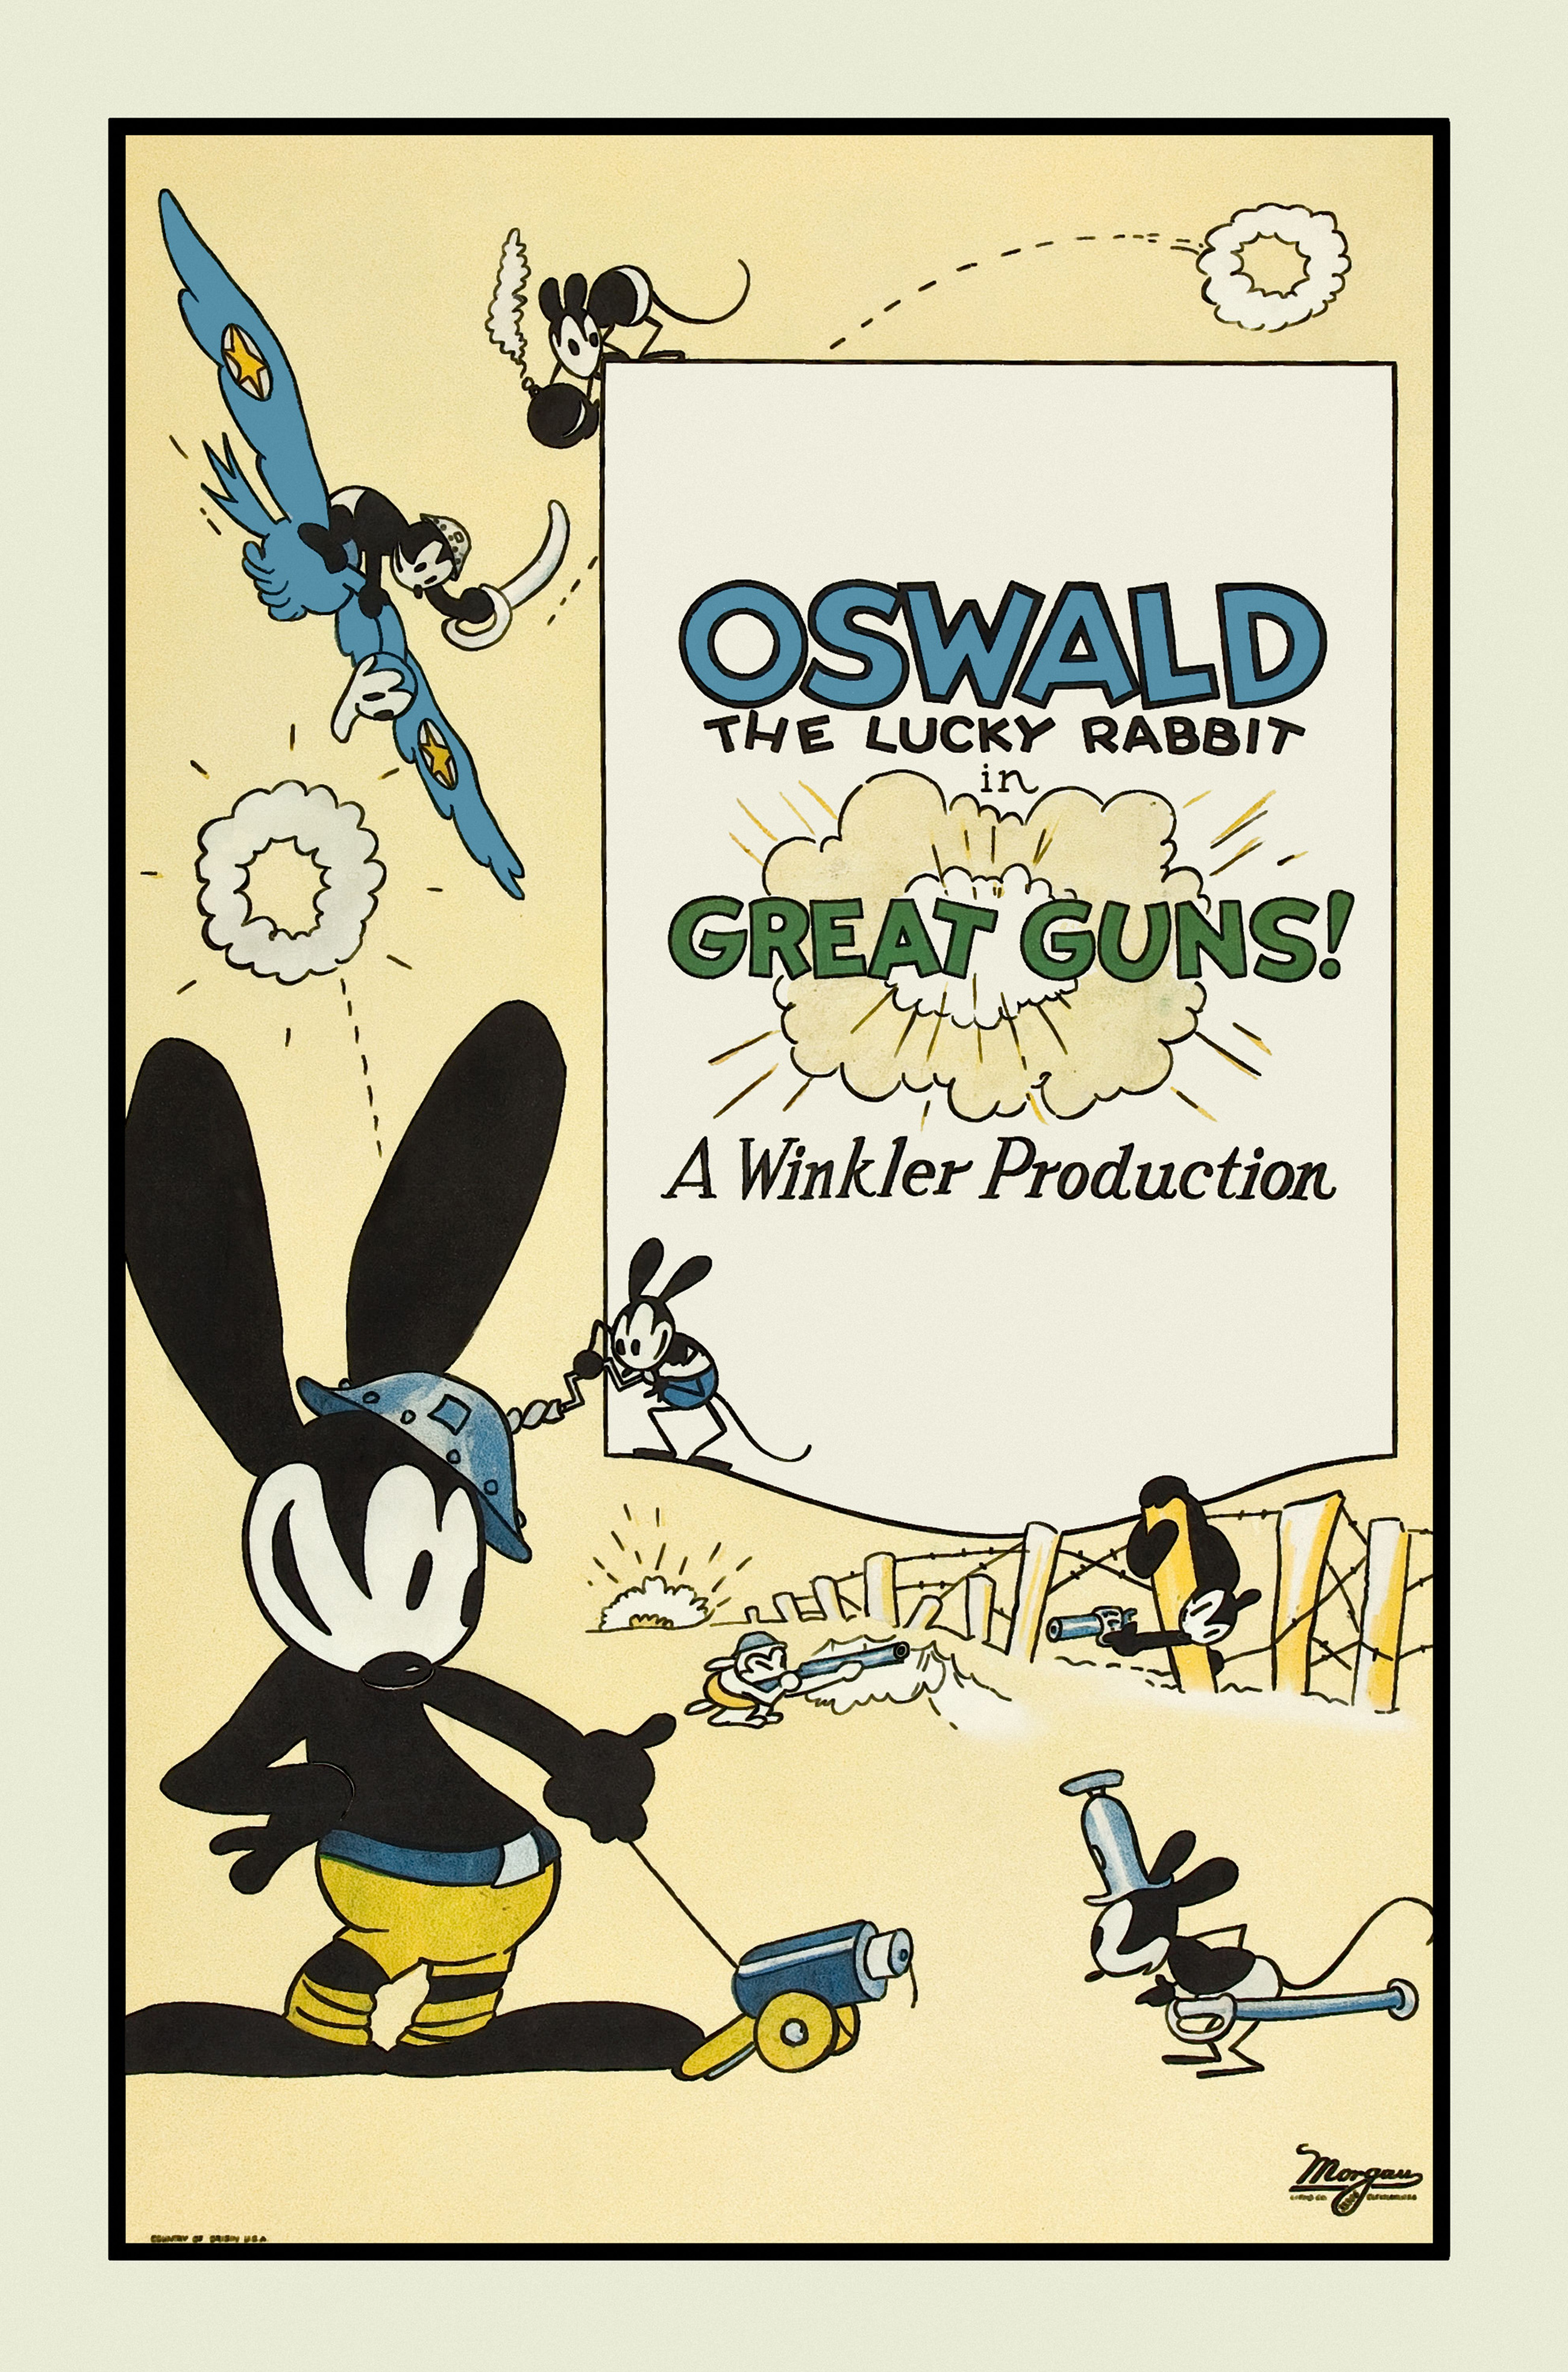 Oswald the Lucky Rabbit was Walt Disney's first successful creation.  But he lost the rights.  As a result of this episode he created Mickey Mouse (Photo by Buyenlarge / Getty Images)